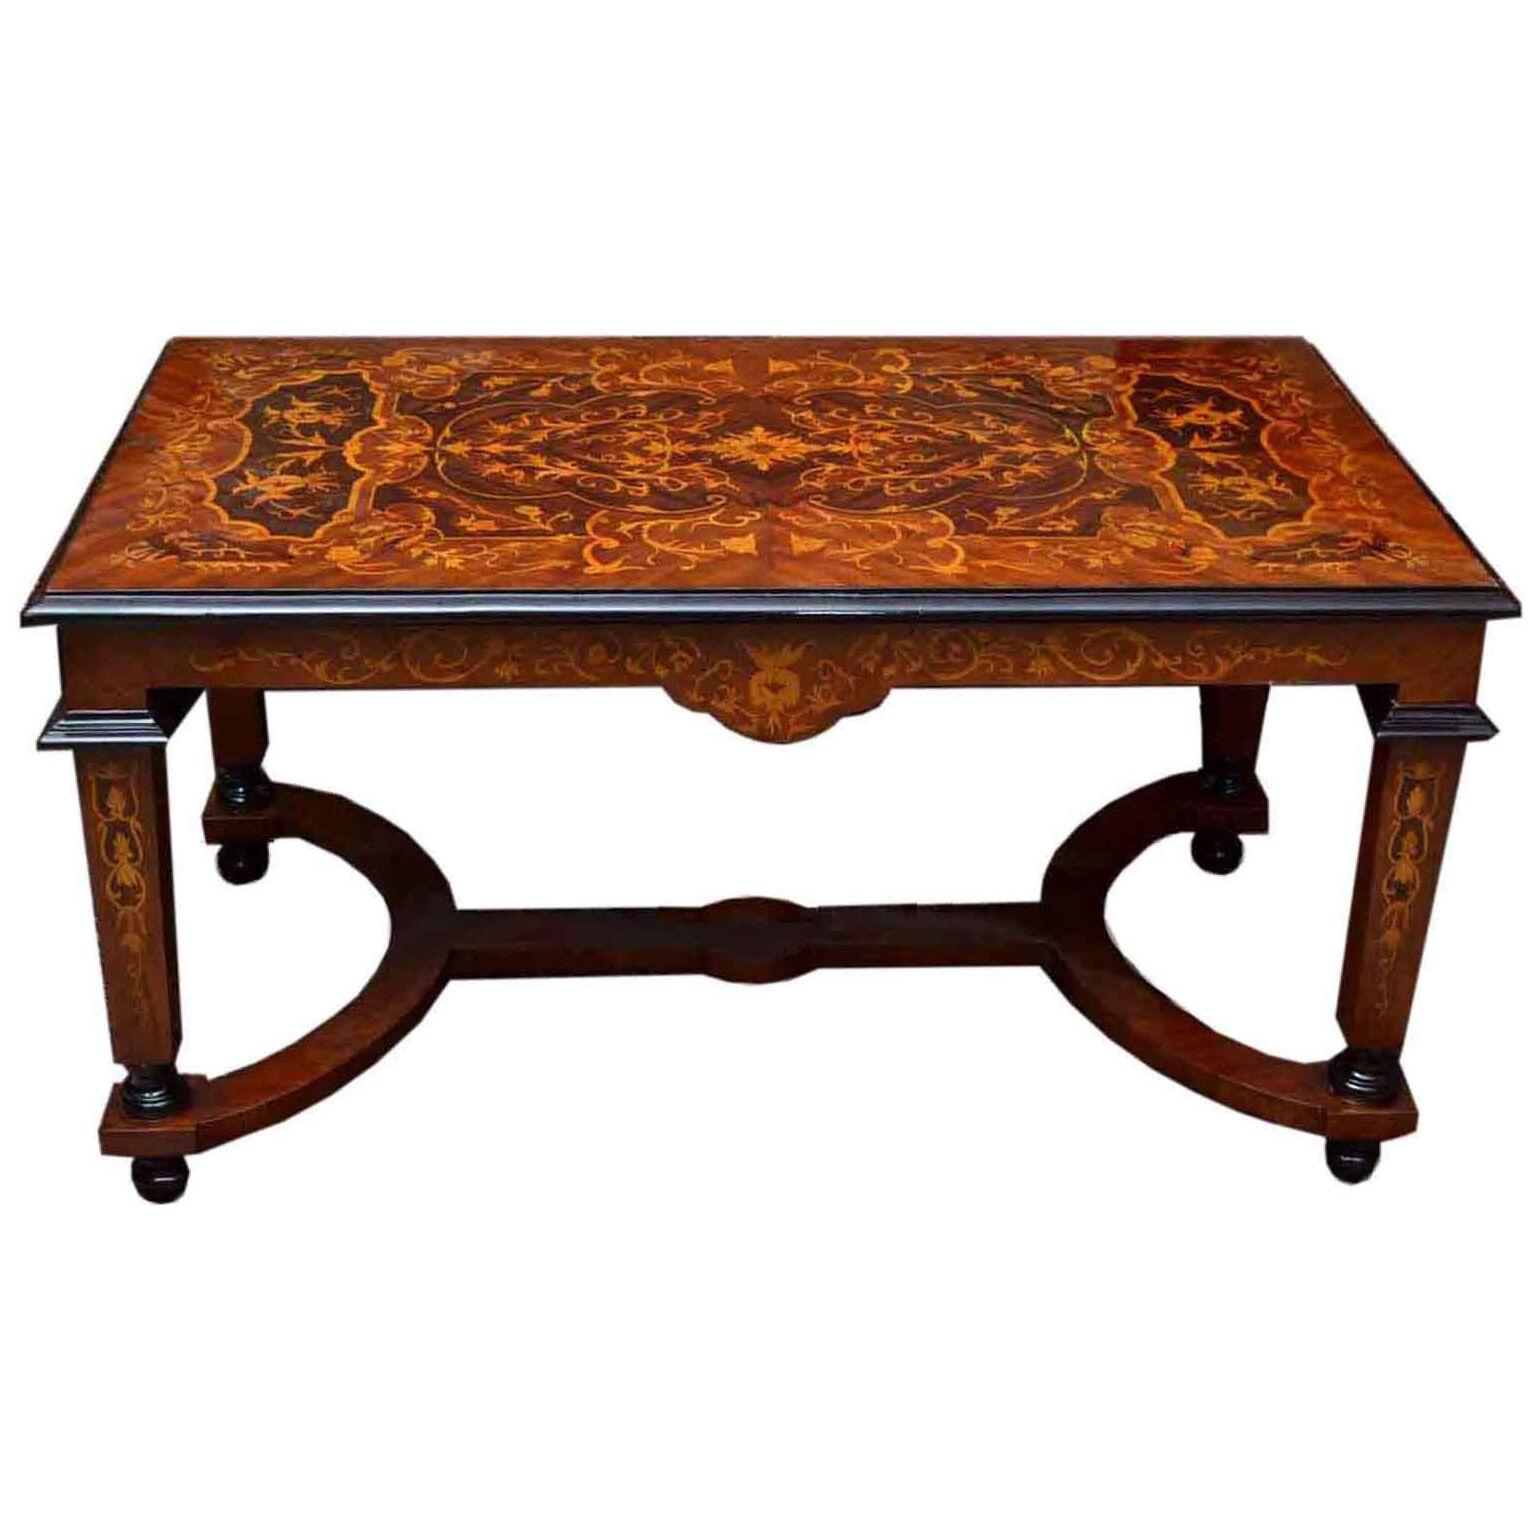 Vintage Victorian Revival Marquetry Coffee Table 20th C